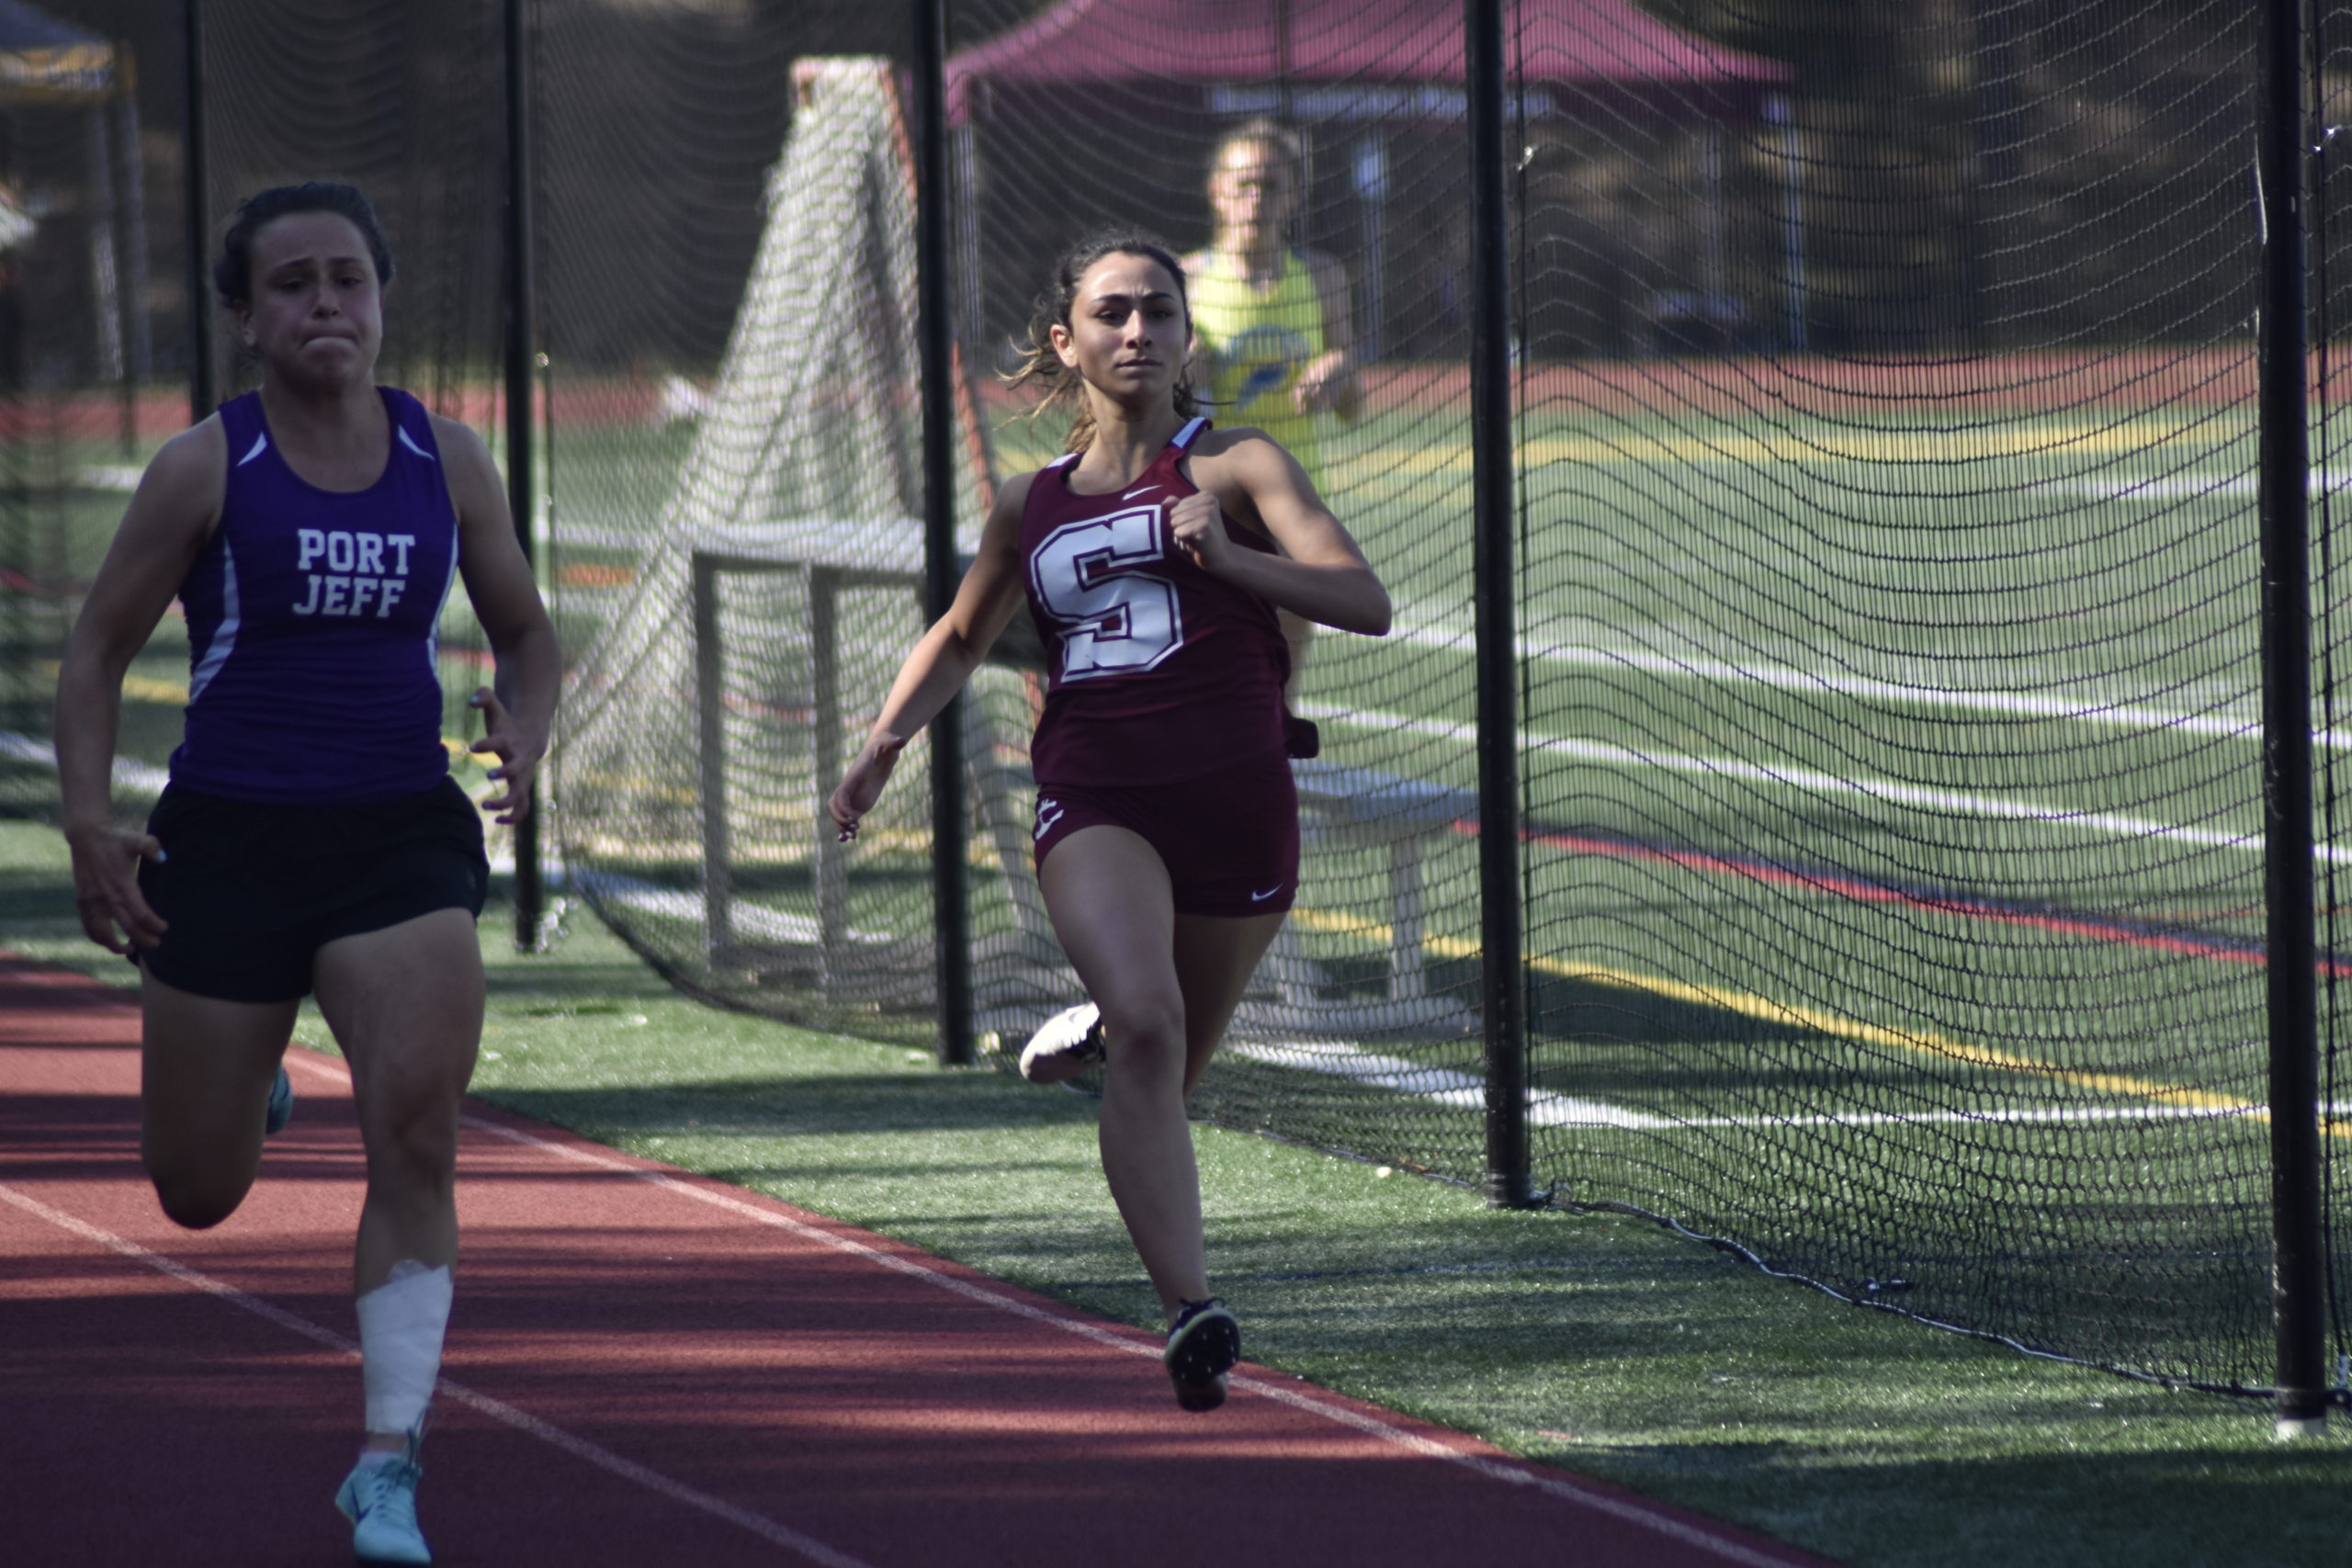 Southampton freshman Kyla Cerullo placed fourth and earned All-Division honors in the 100-meter dash.